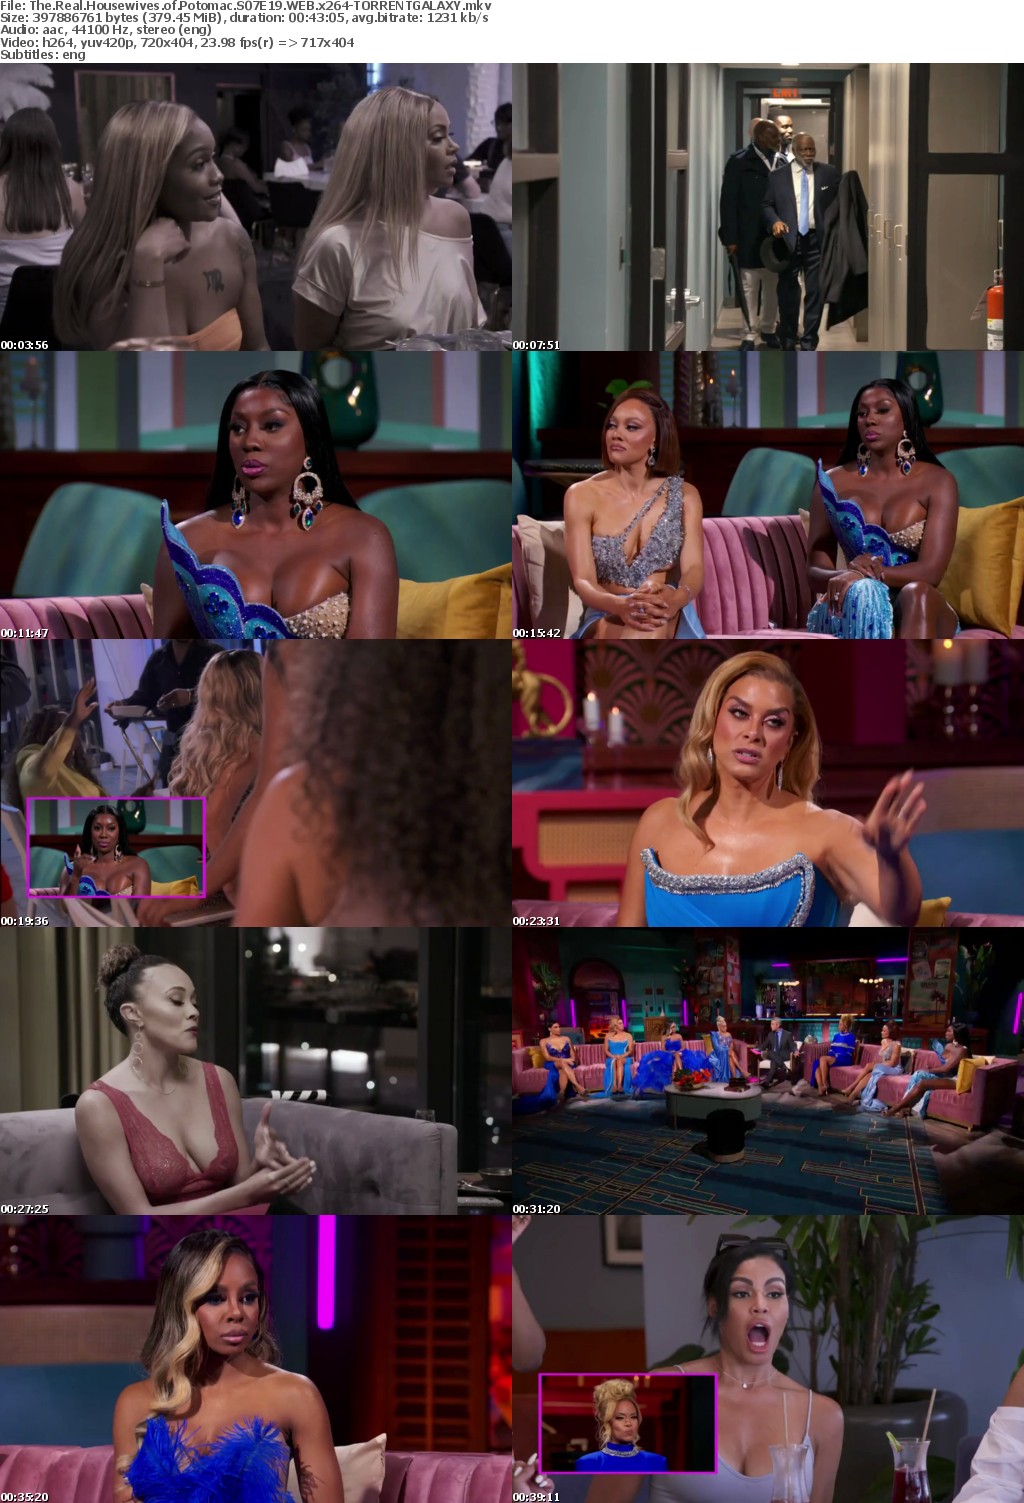 The Real Housewives of Potomac S07E19 WEB x264-GALAXY